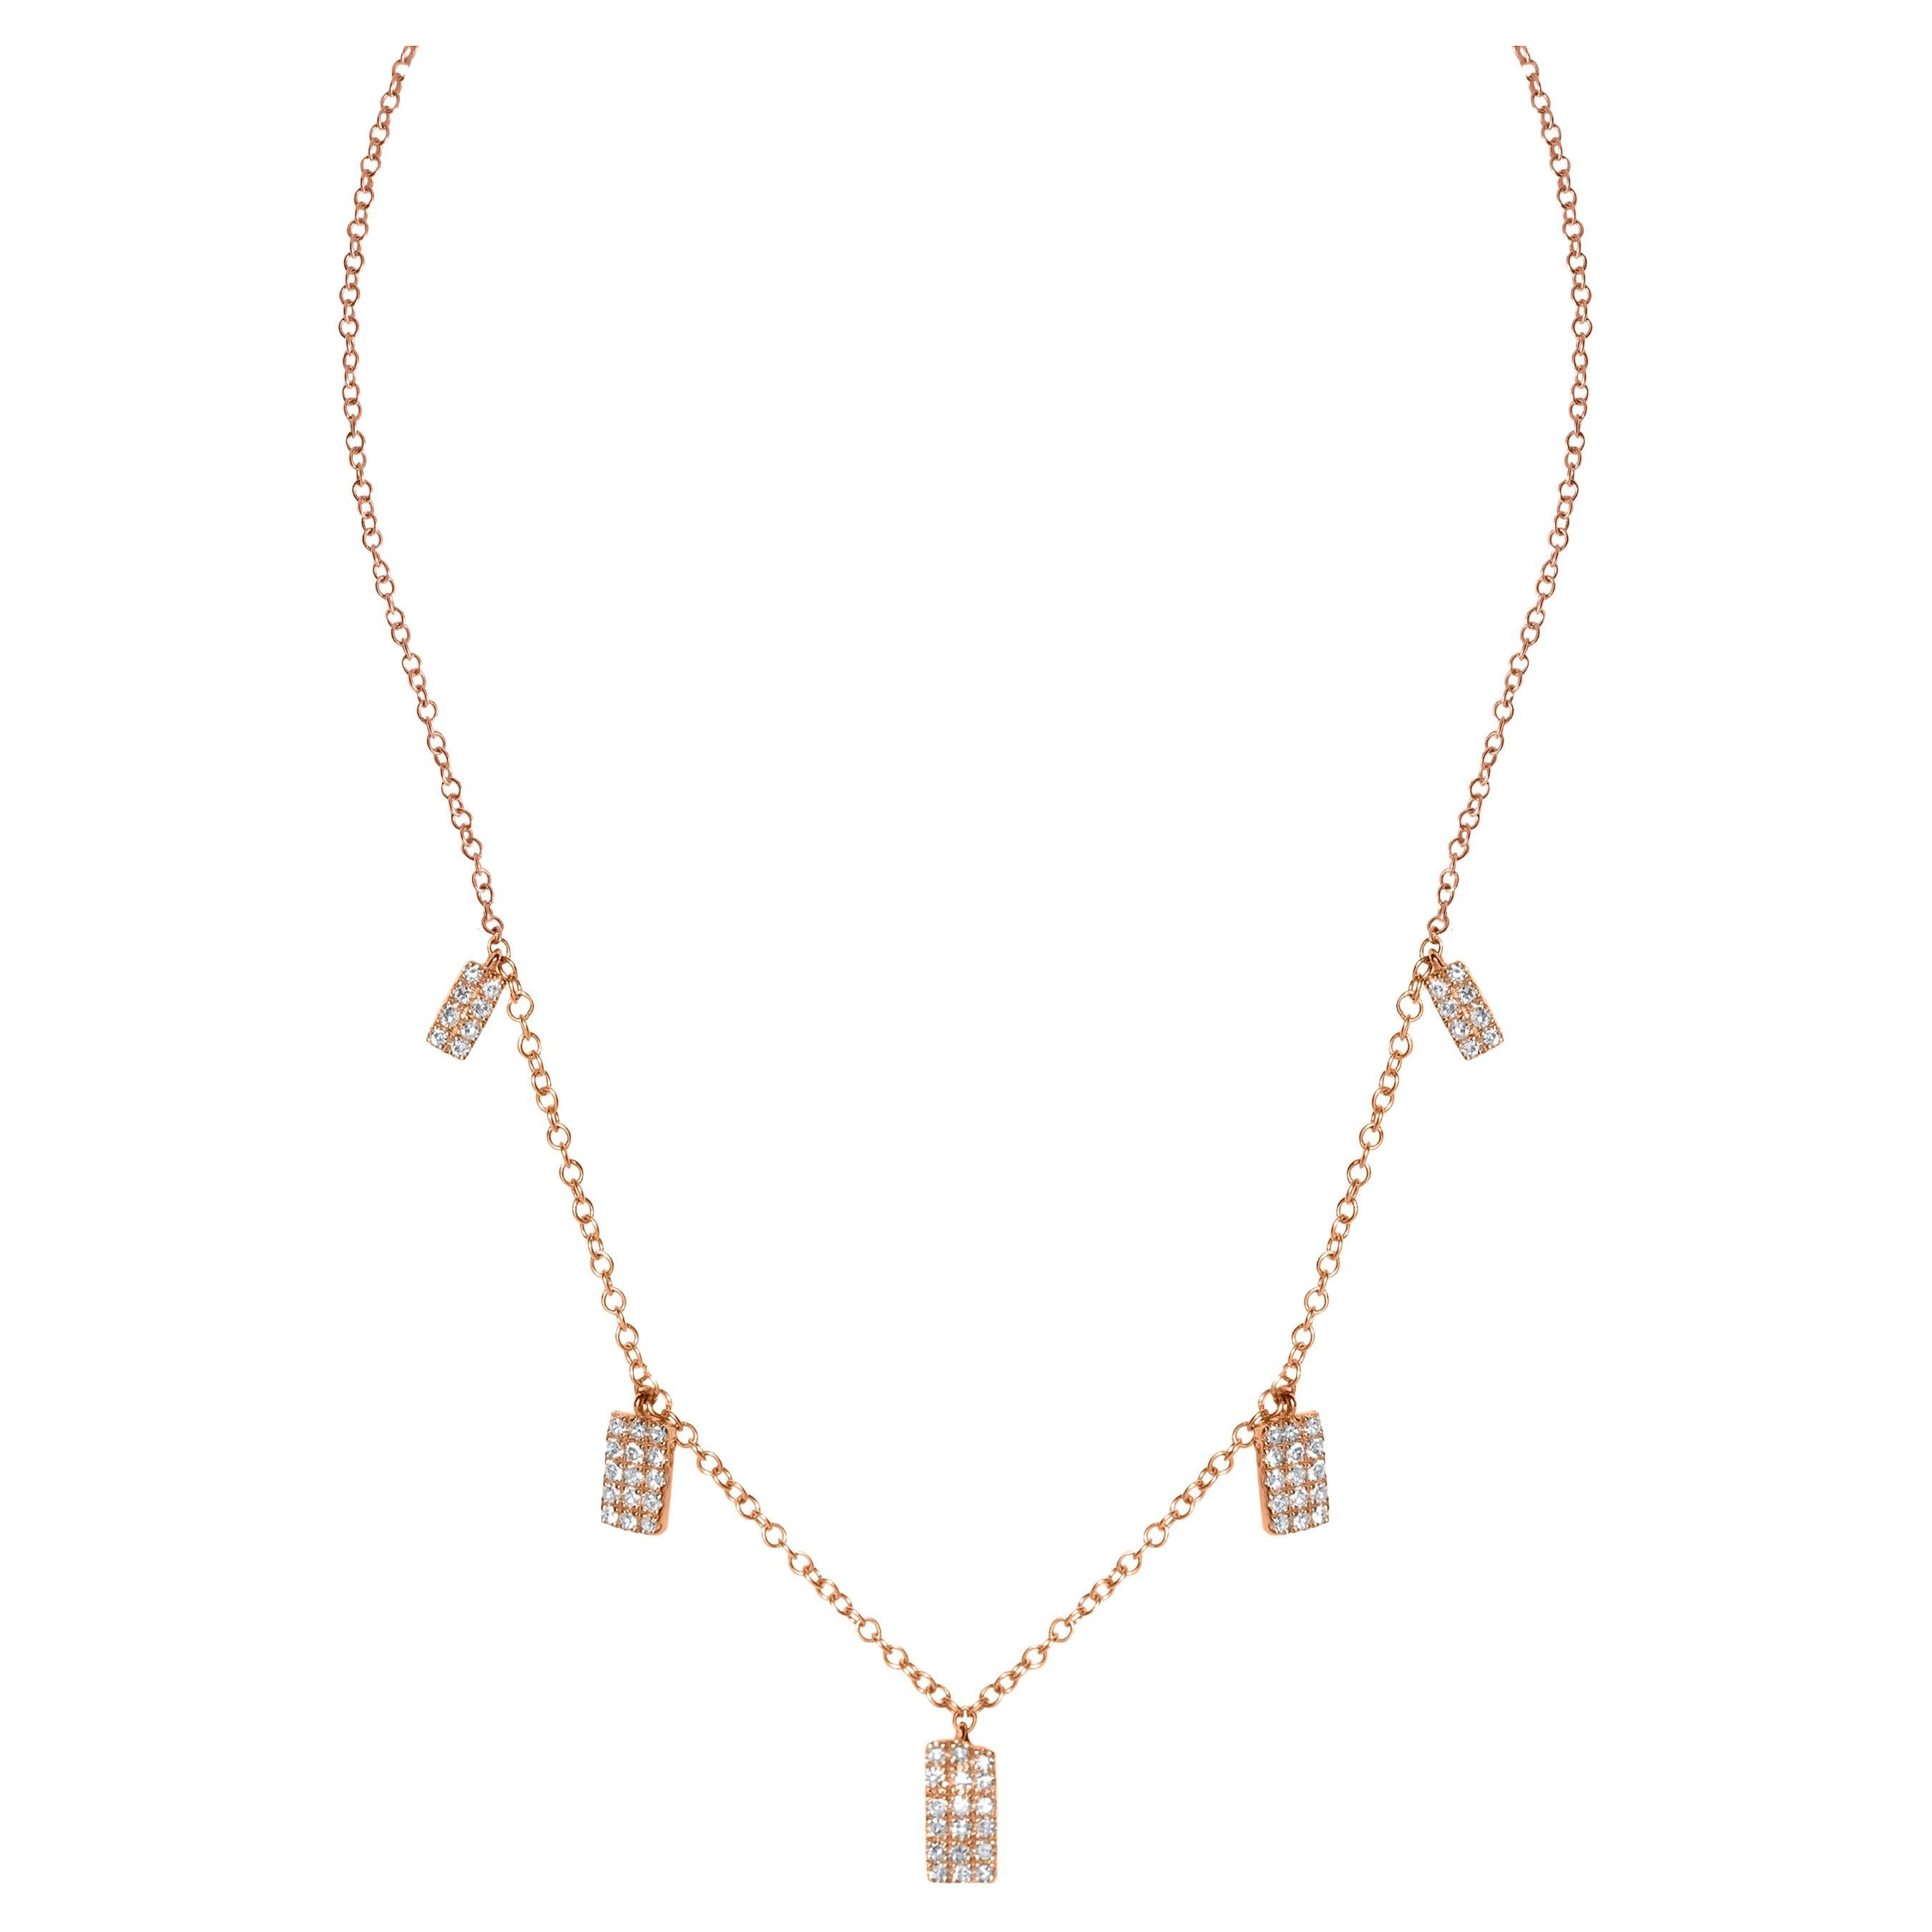 Luxle Charm Diamond Necklace in 14 Karat Rose Gold For Sale